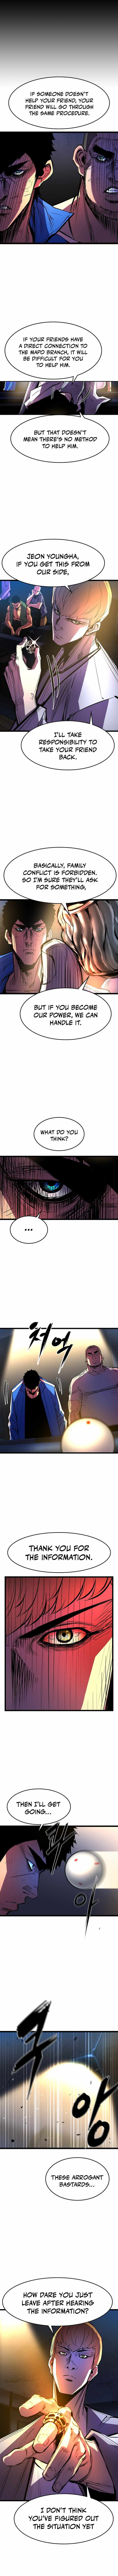 Hanlim Gym Chapter 74 page 8